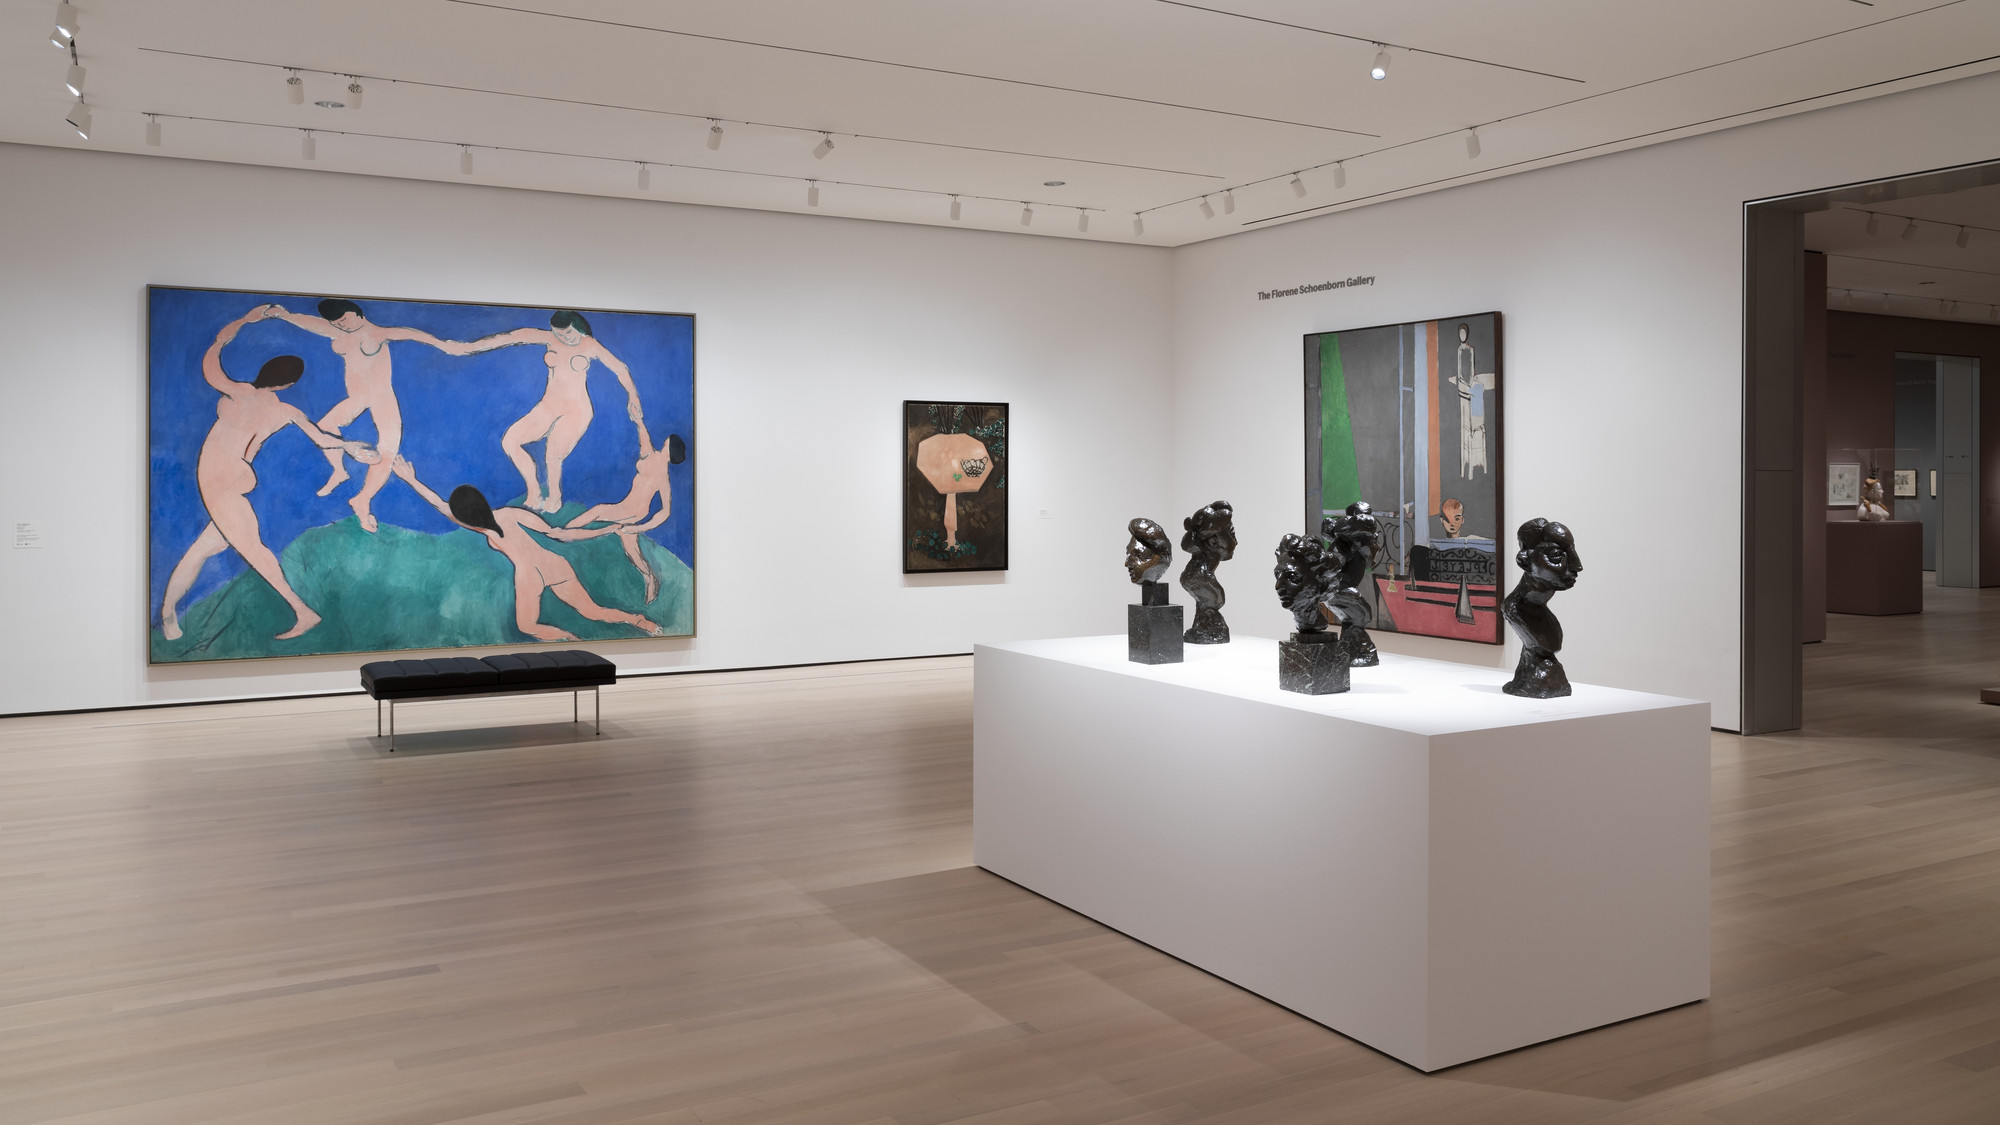 Installation view of the gallery "Henri Matisse" in the exhibition